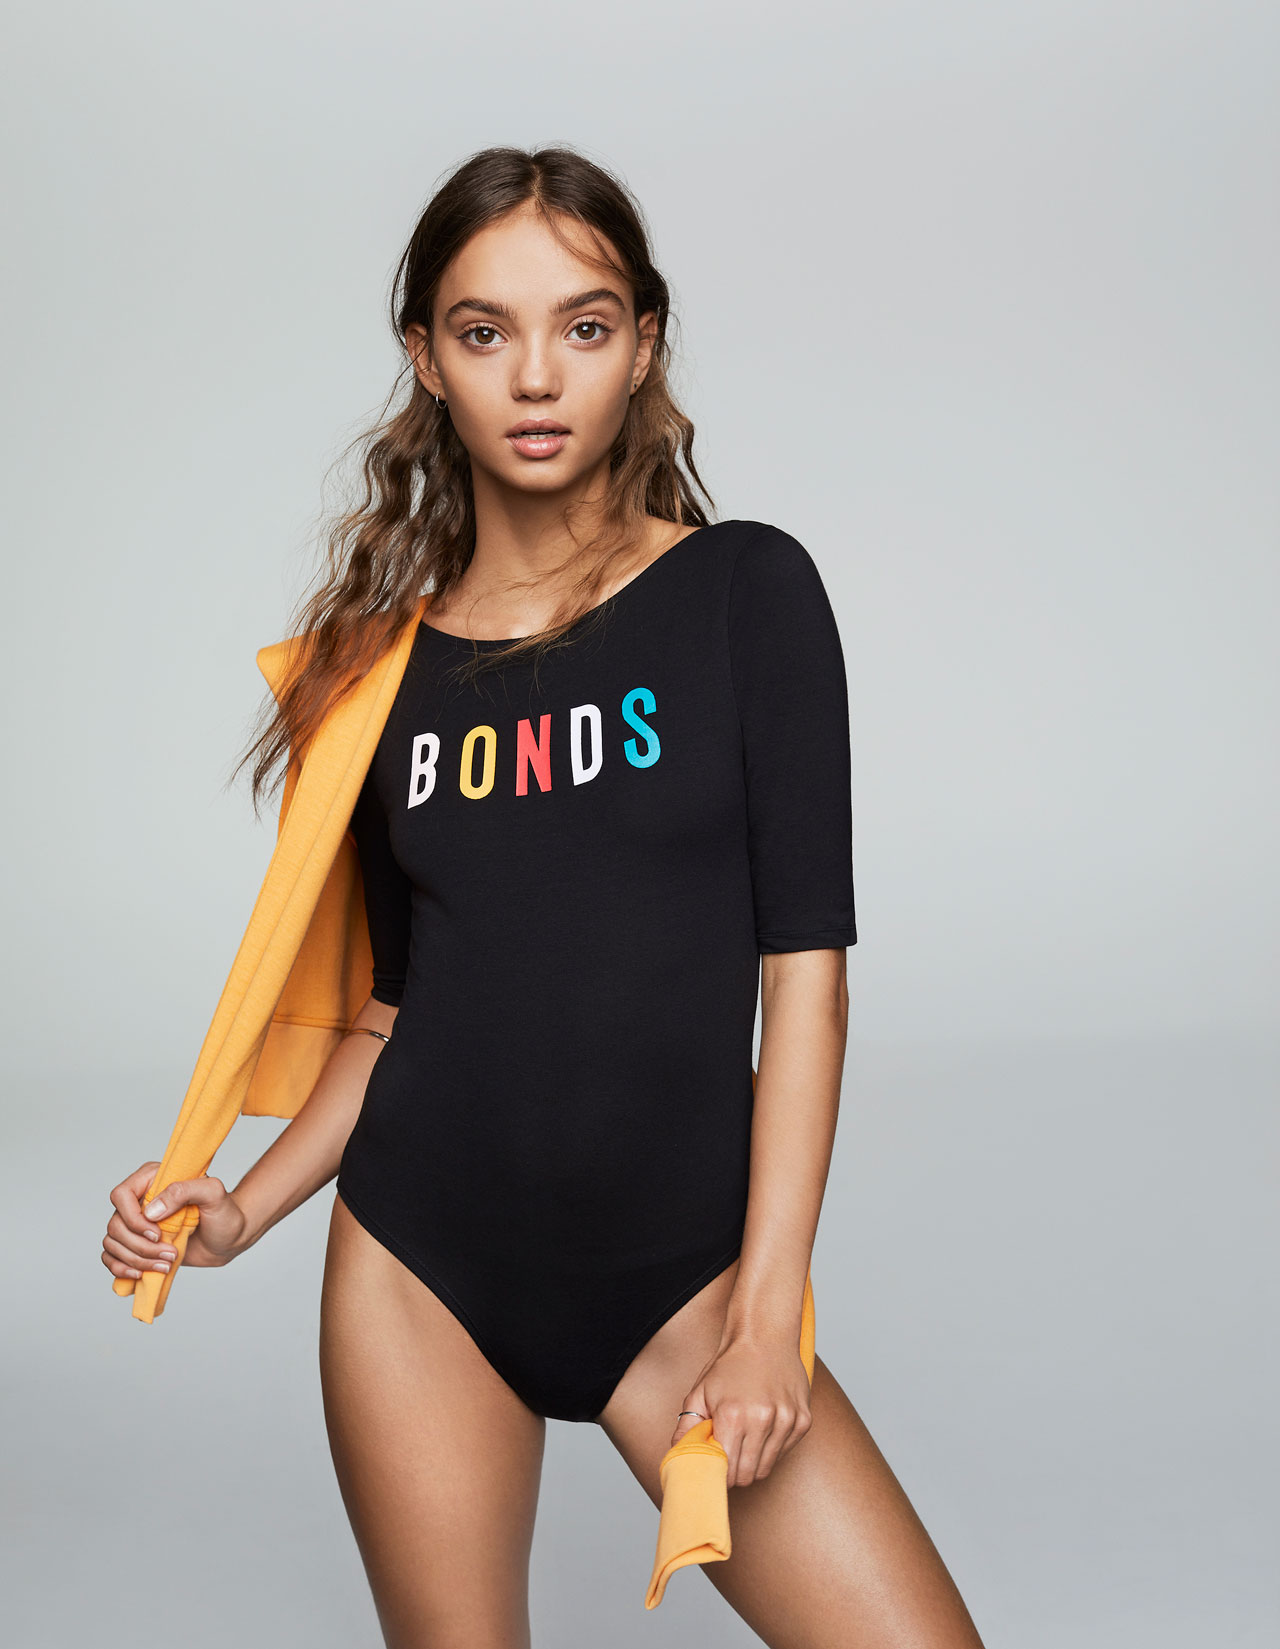 Inka Williams Talks Candidly Of Becoming An Official Bonds Girl 5681